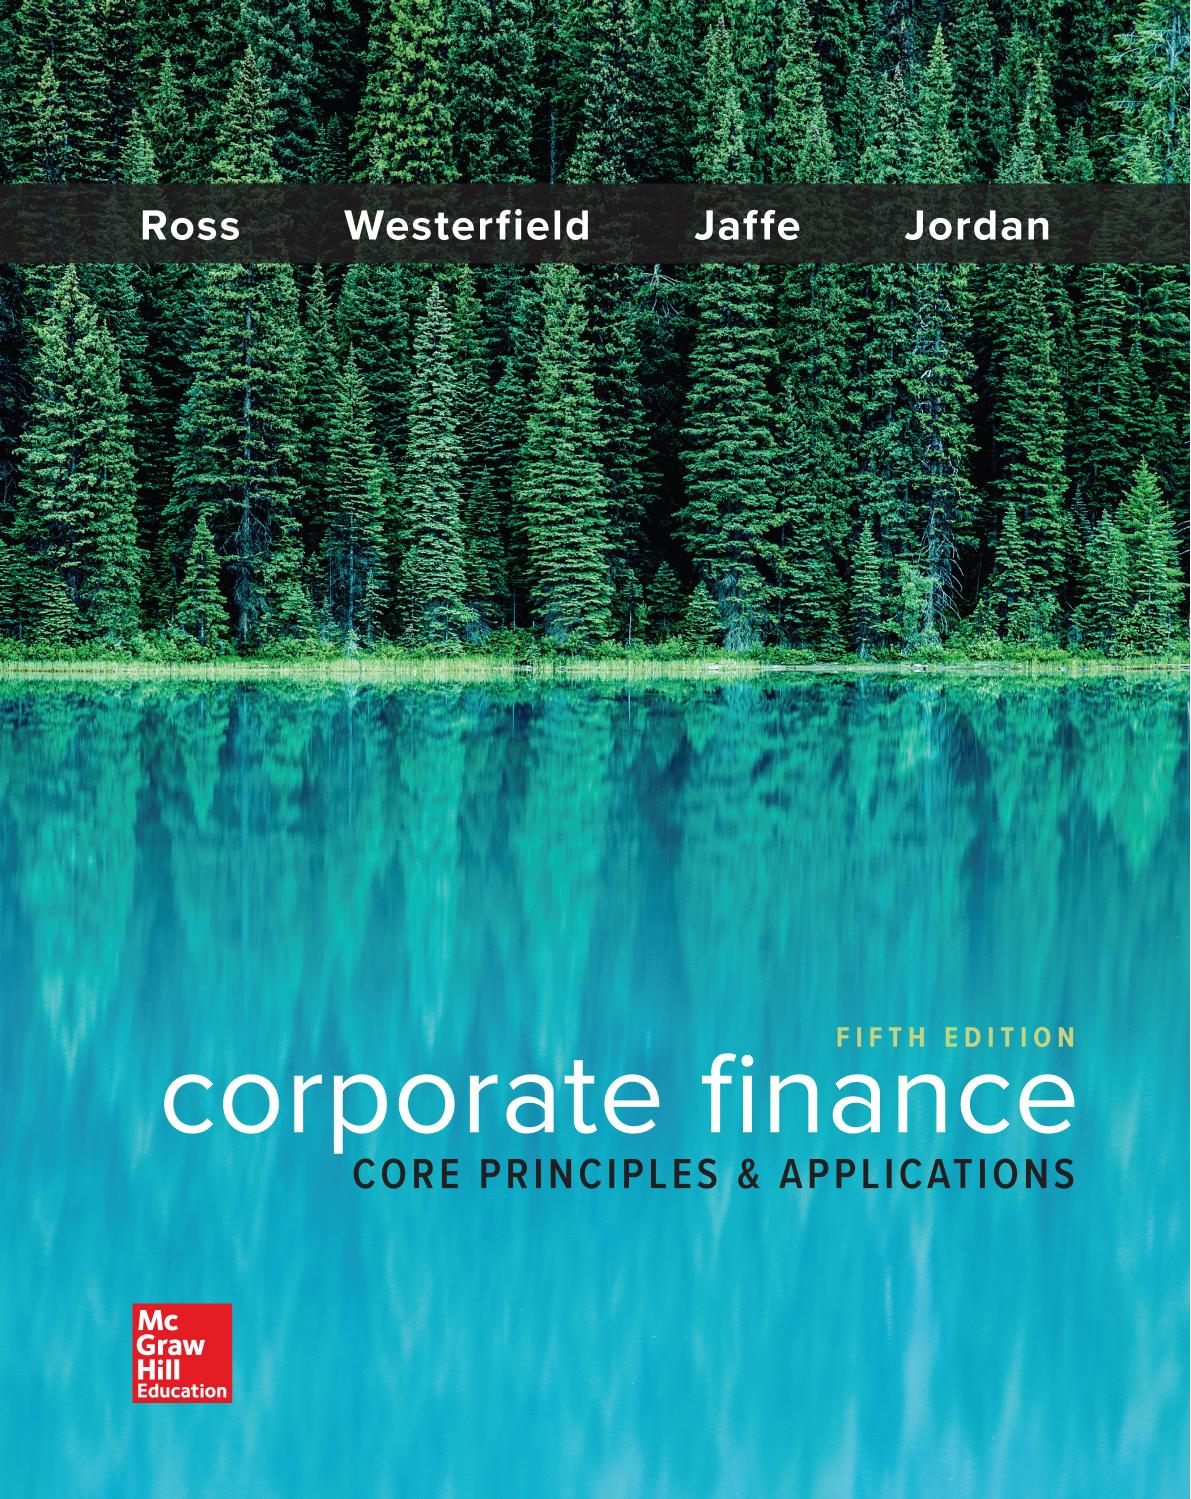 Corporate Finance Core Principles and Applications 5th Edition by Stephen Ross.jpg